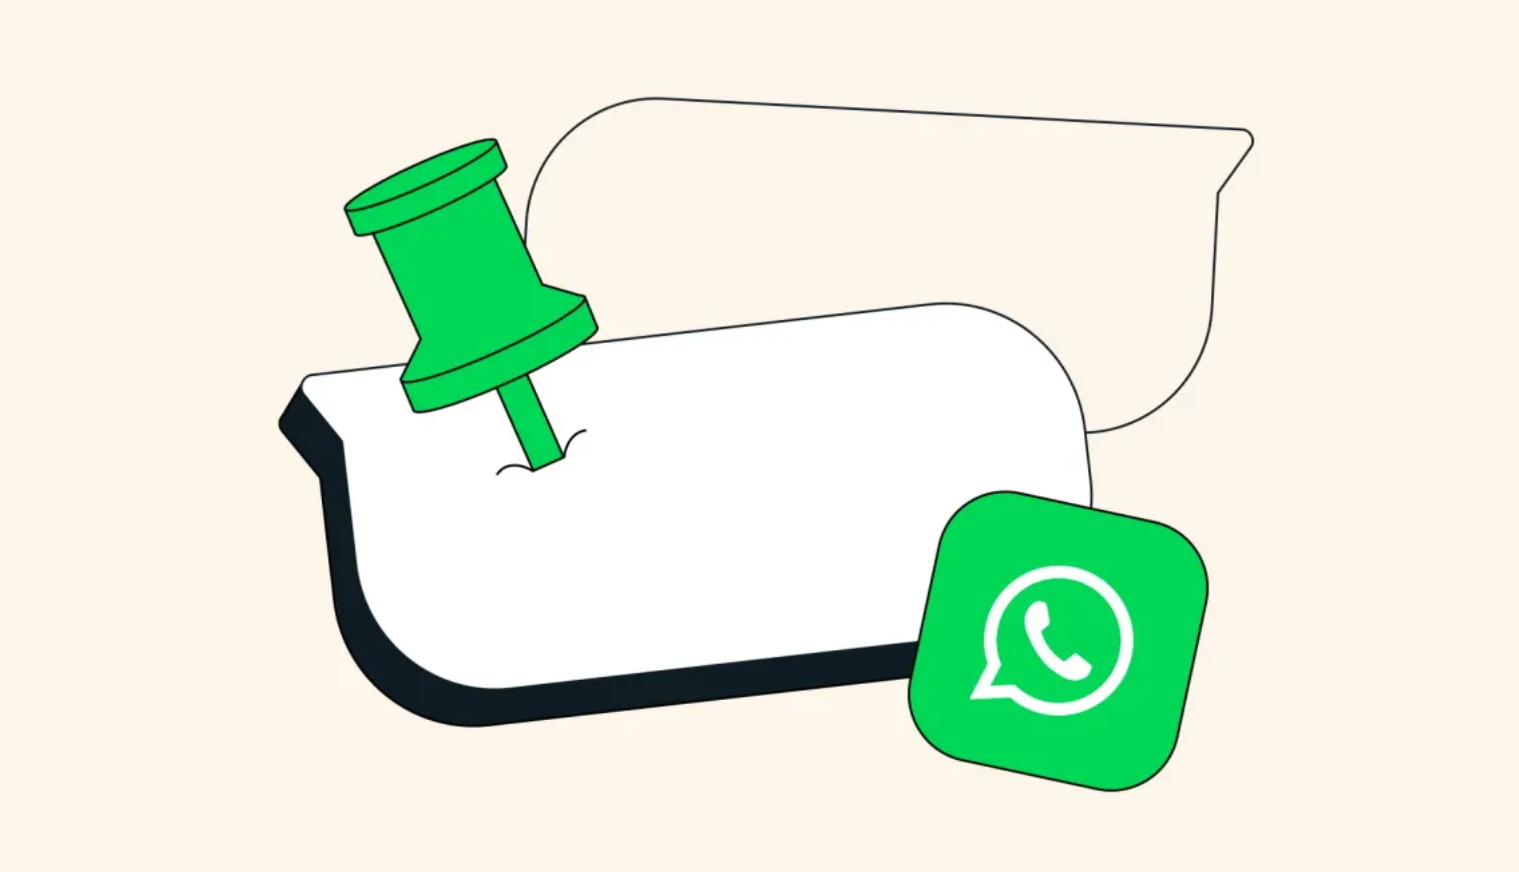 Pinned Messages on WhatsApp: How Does it Work?